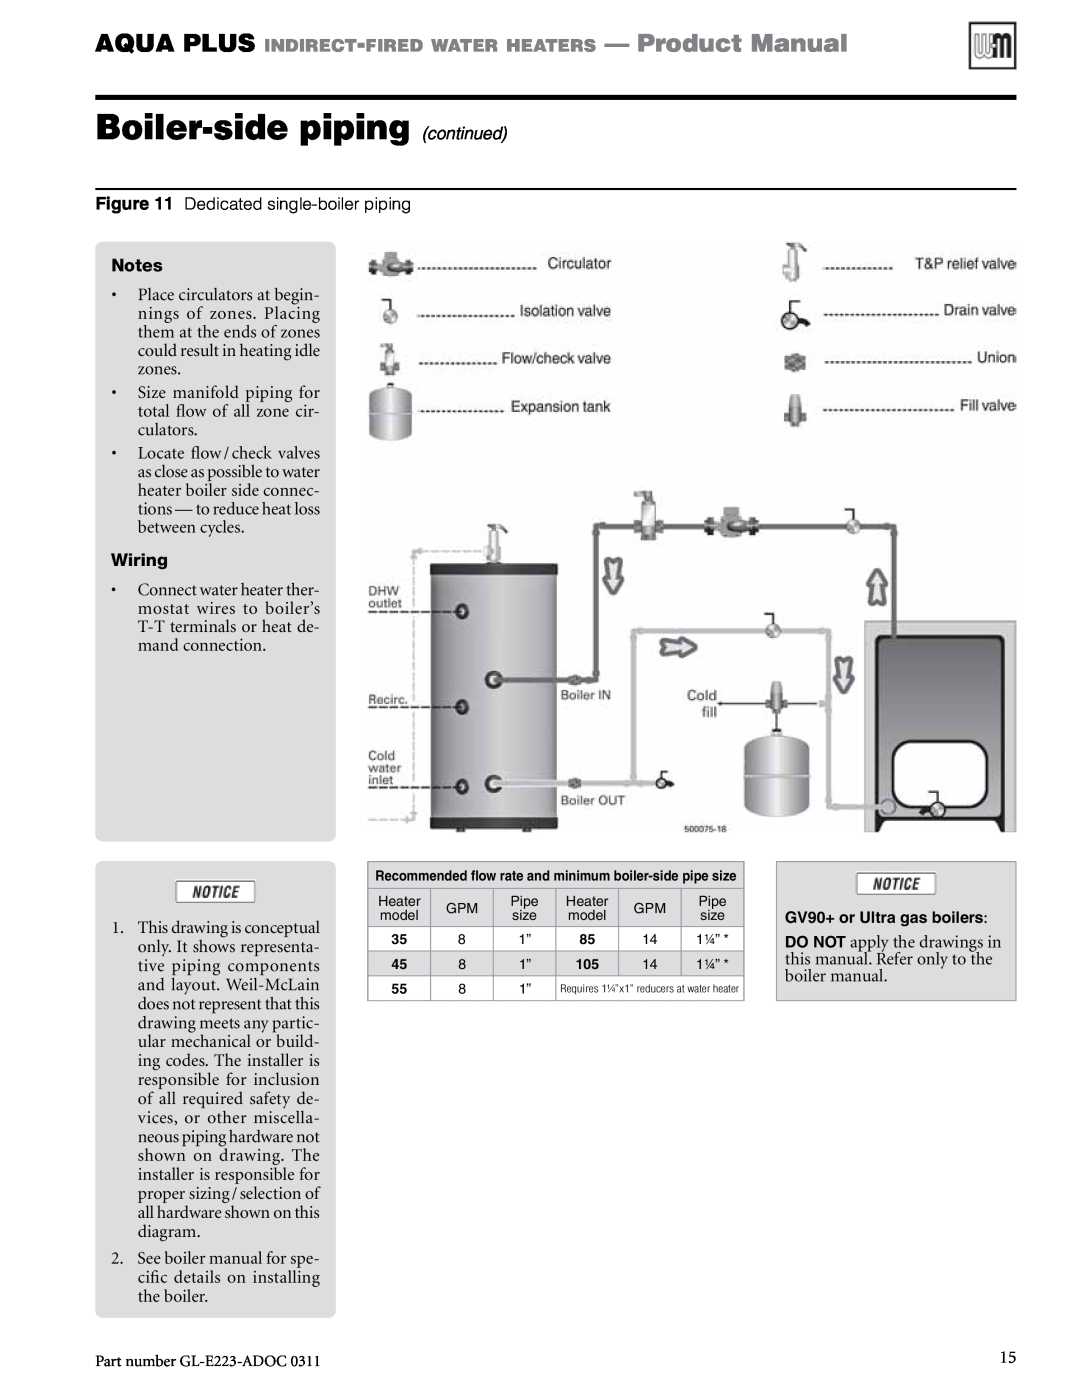 Weil-McLain GL-E223-ADOC 0311 manual Boiler-sidepiping continued, Wiring 